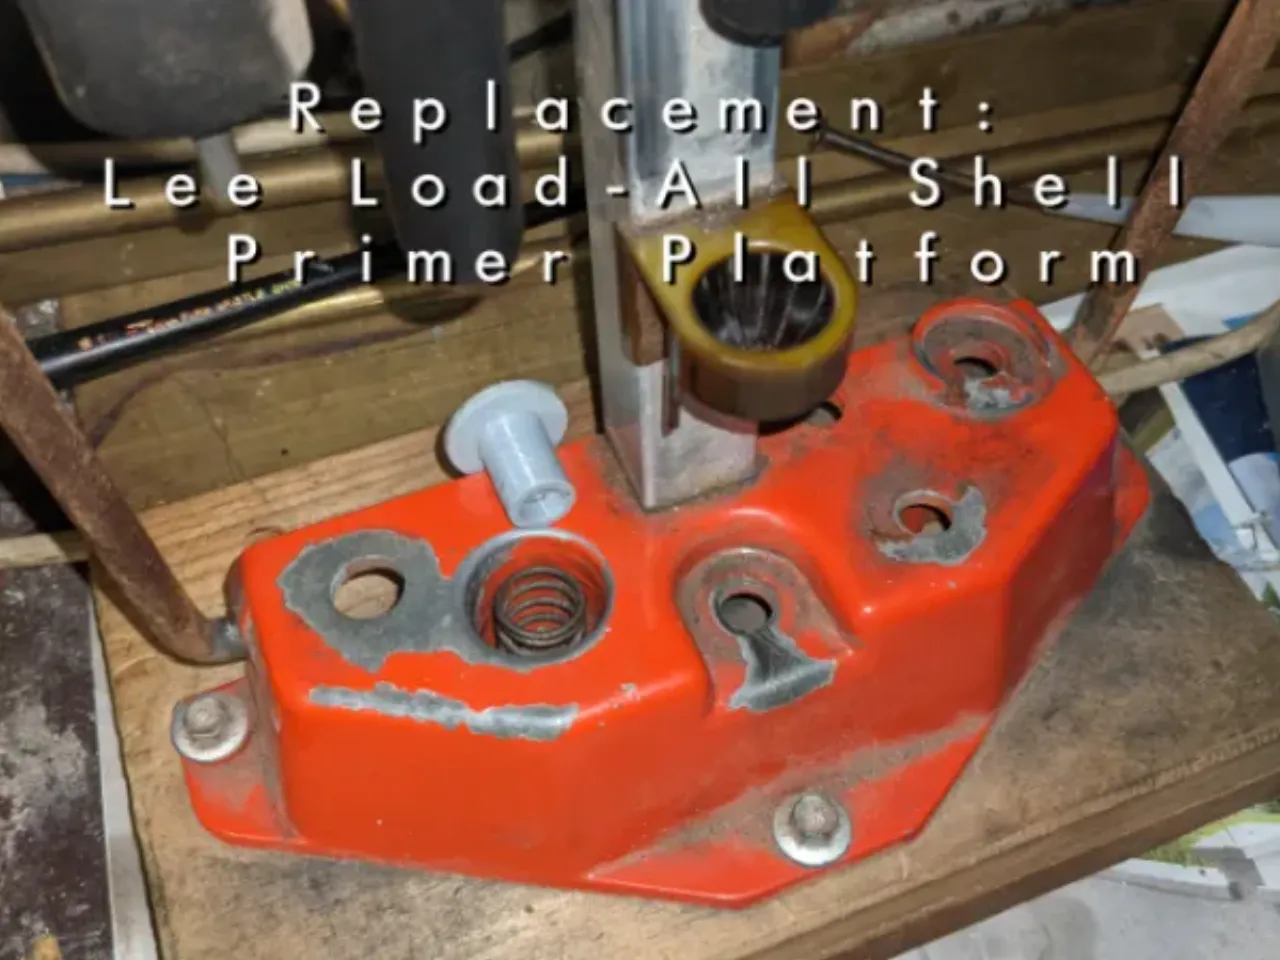 Replacement Platform for Lee Load-All Shell Primer by SteveW91 | Download  free STL model 